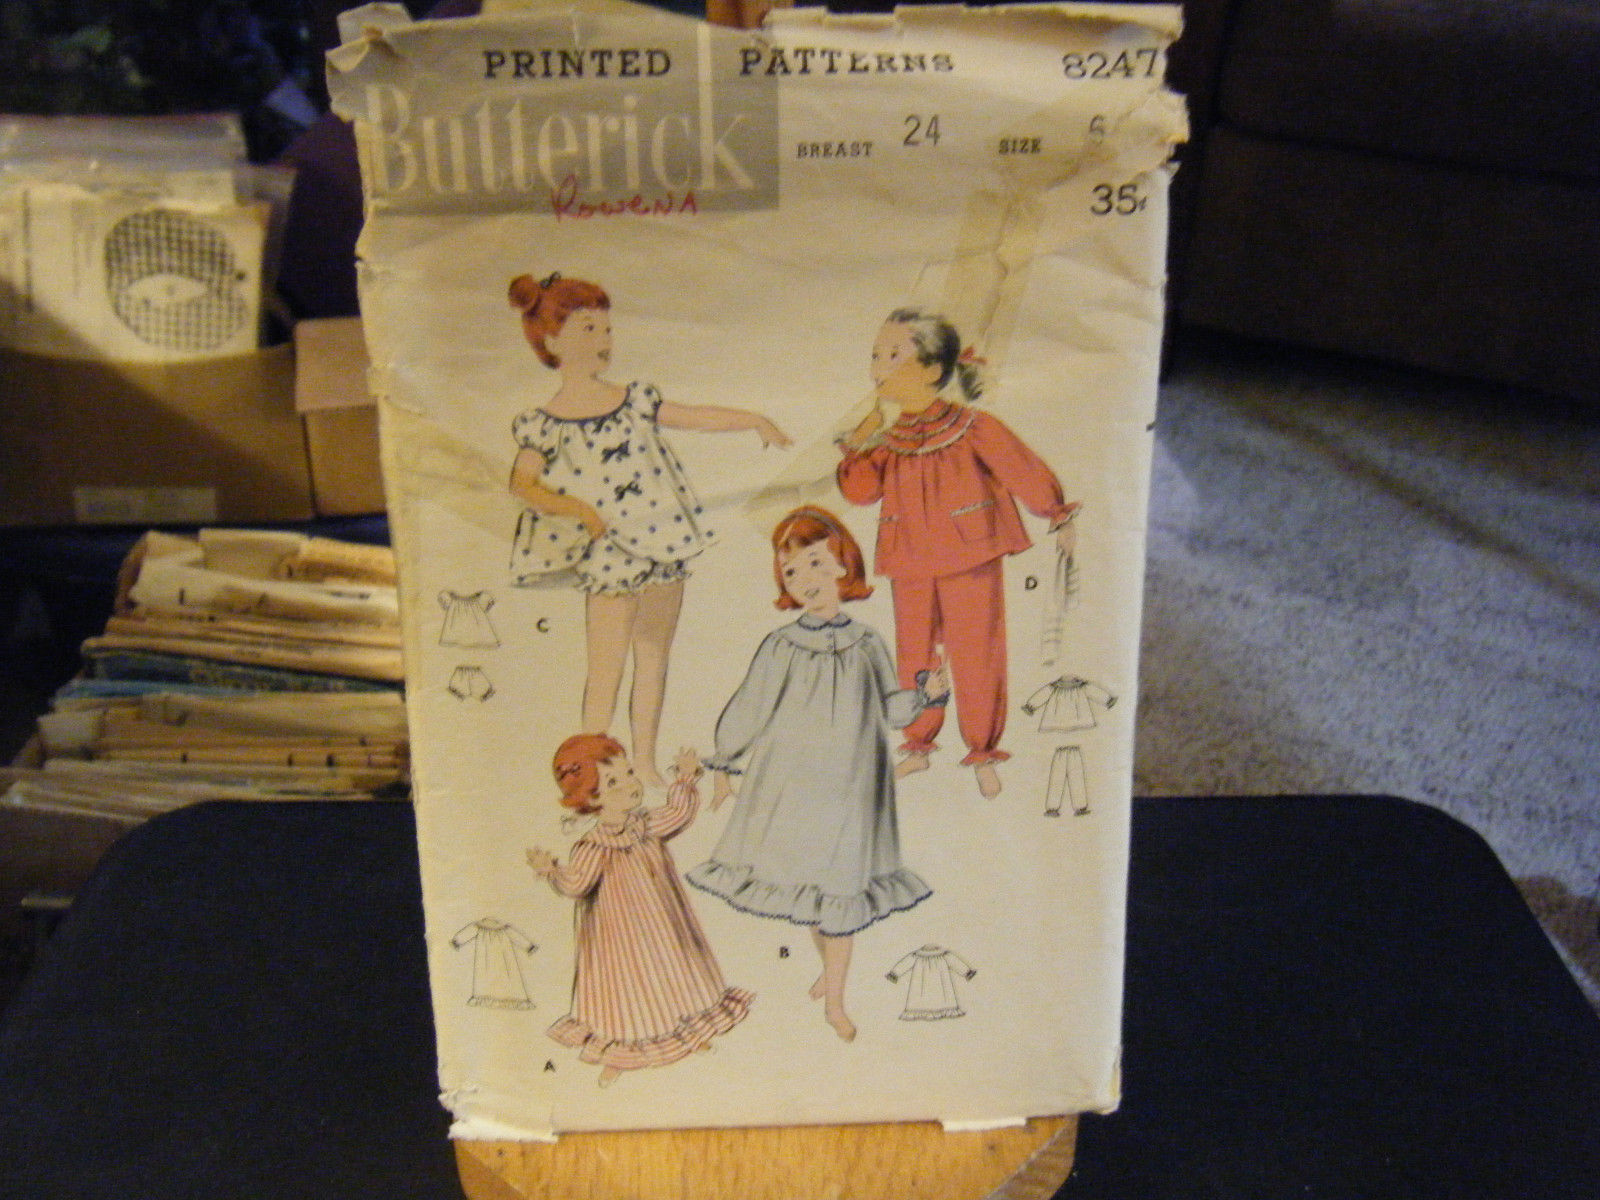 Primary image for Butterick 8247 Girl's Nightgowns & Pajamas Pattern - Size 6 Chest 24